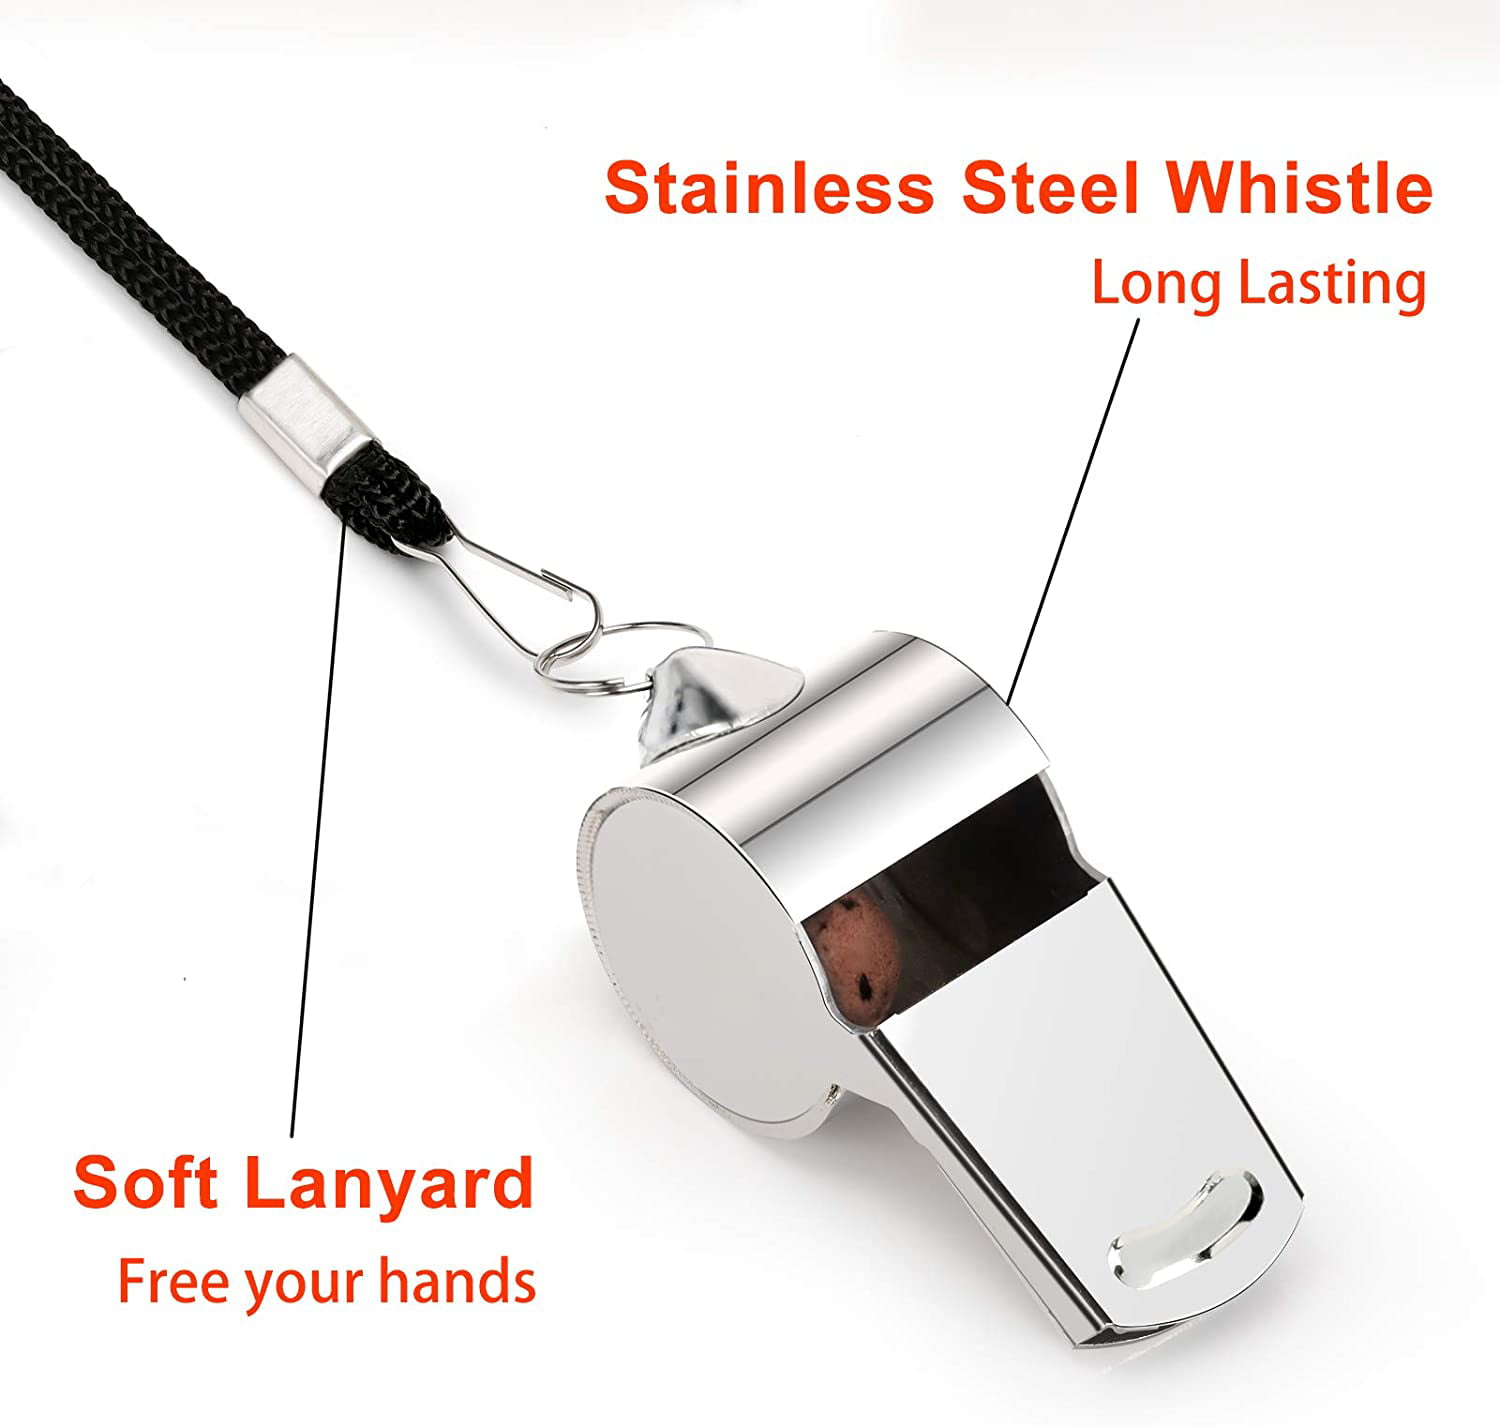 Silver, 5 pcs Coach Whistle with Lanyard Competition,Training Sports Referee Stainless Steel Whistles Emergency 